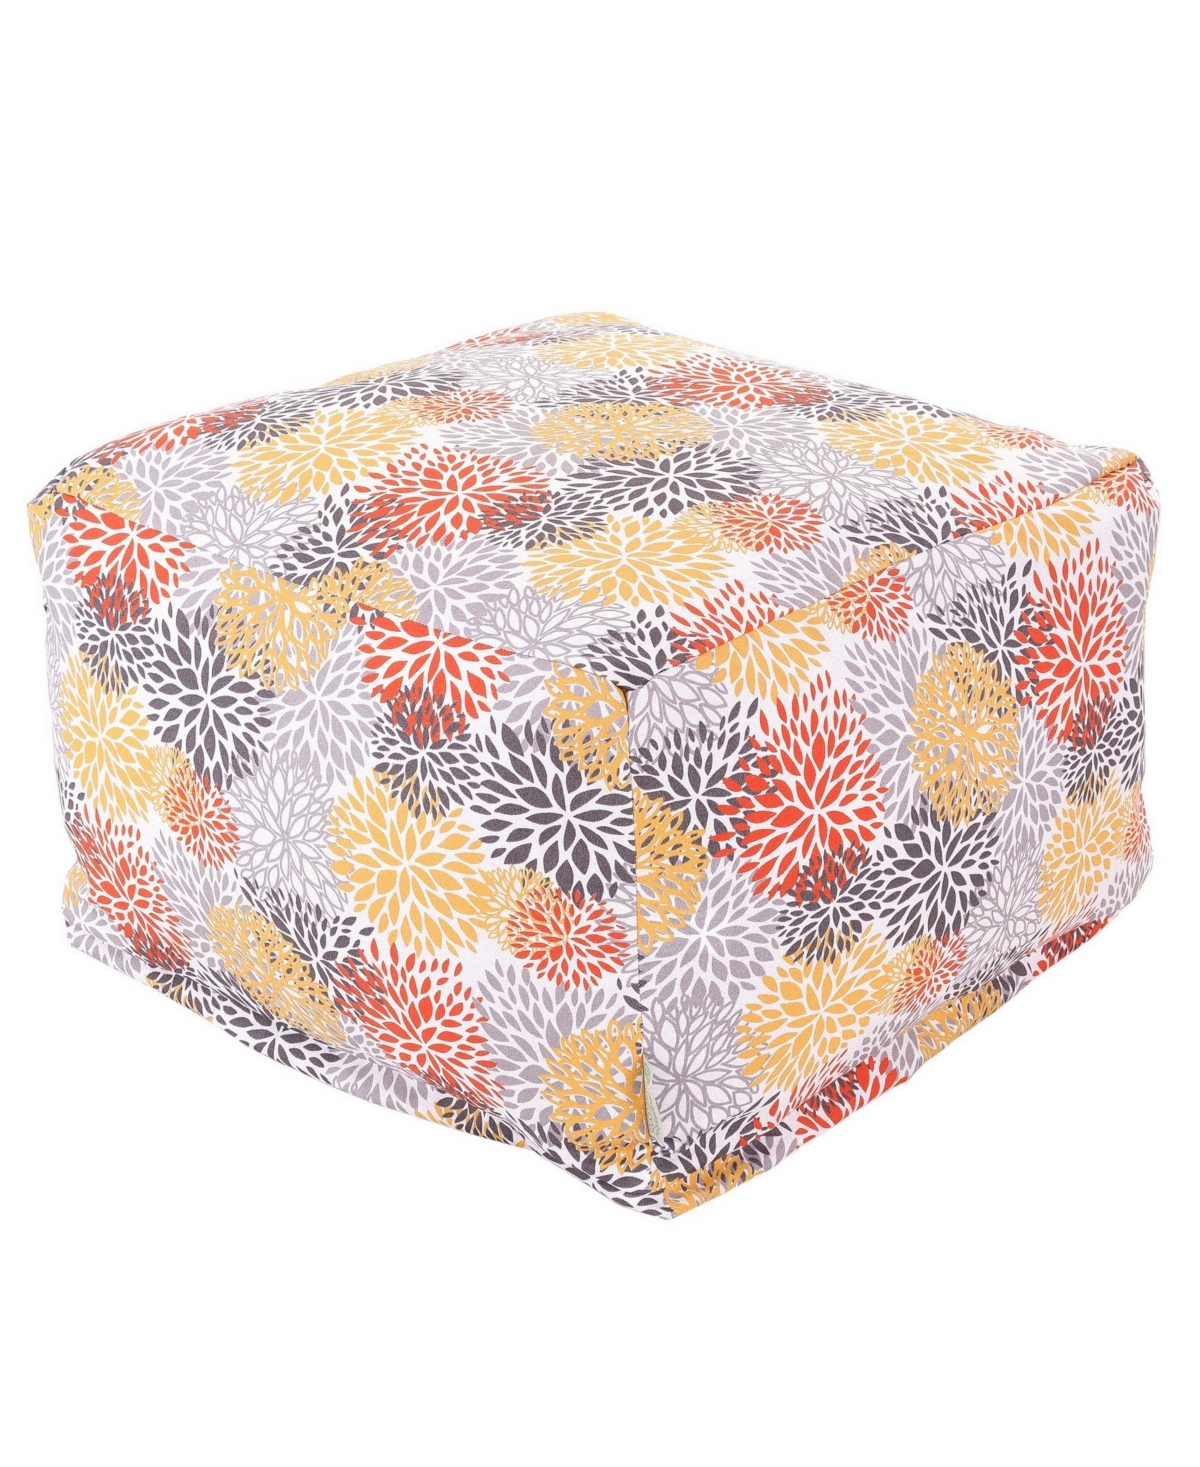 UPC 859072202764 product image for Majestic Home Goods Booms Ottoman Square Pouf 27